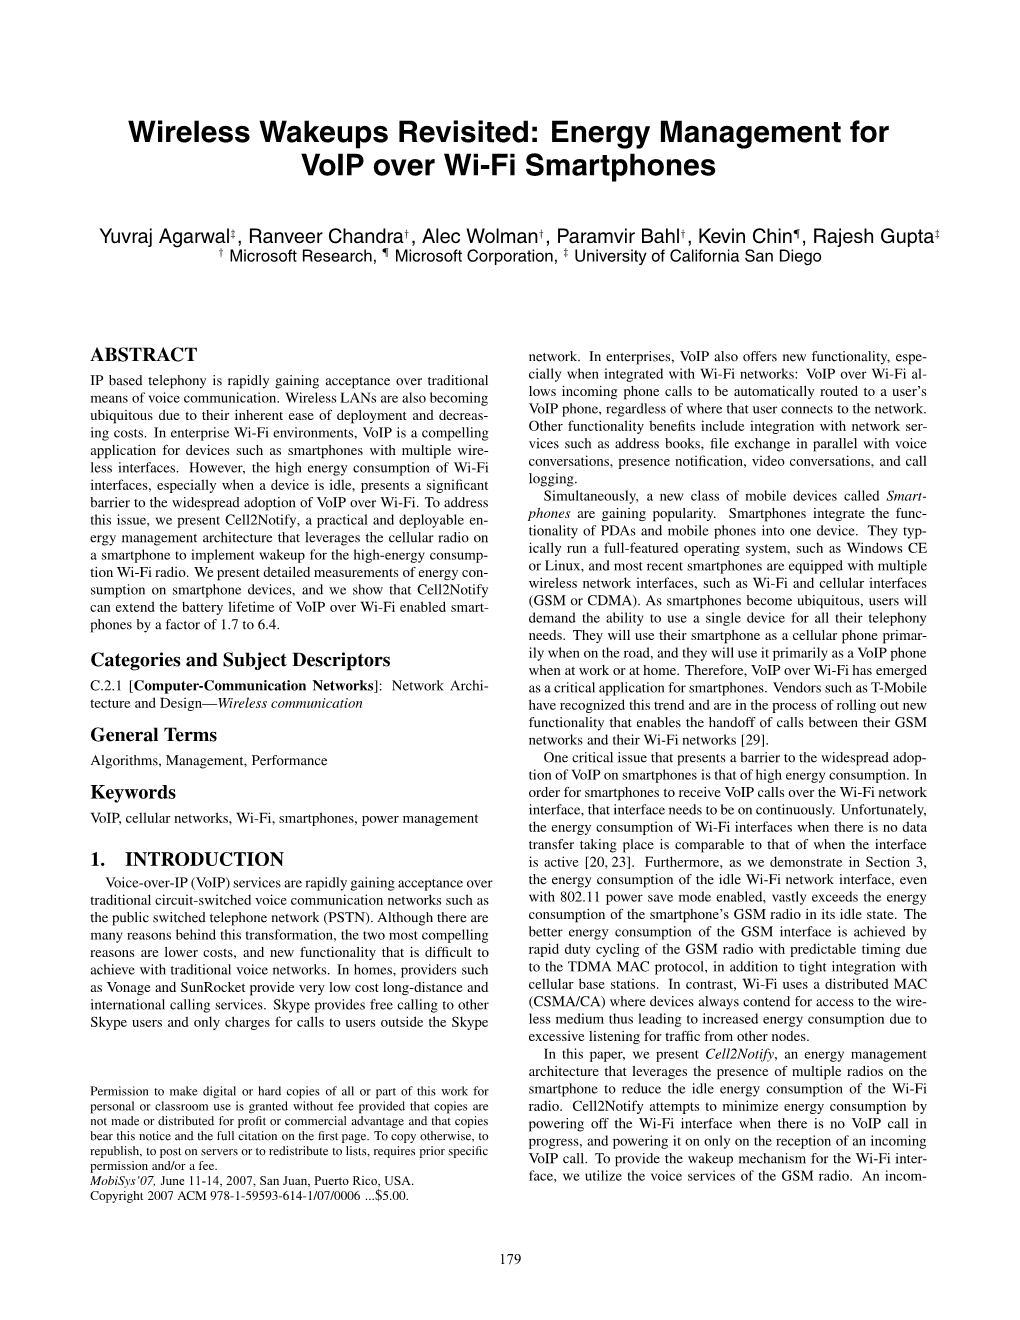 Energy Management for Voip Over Wi-Fi Smartphones